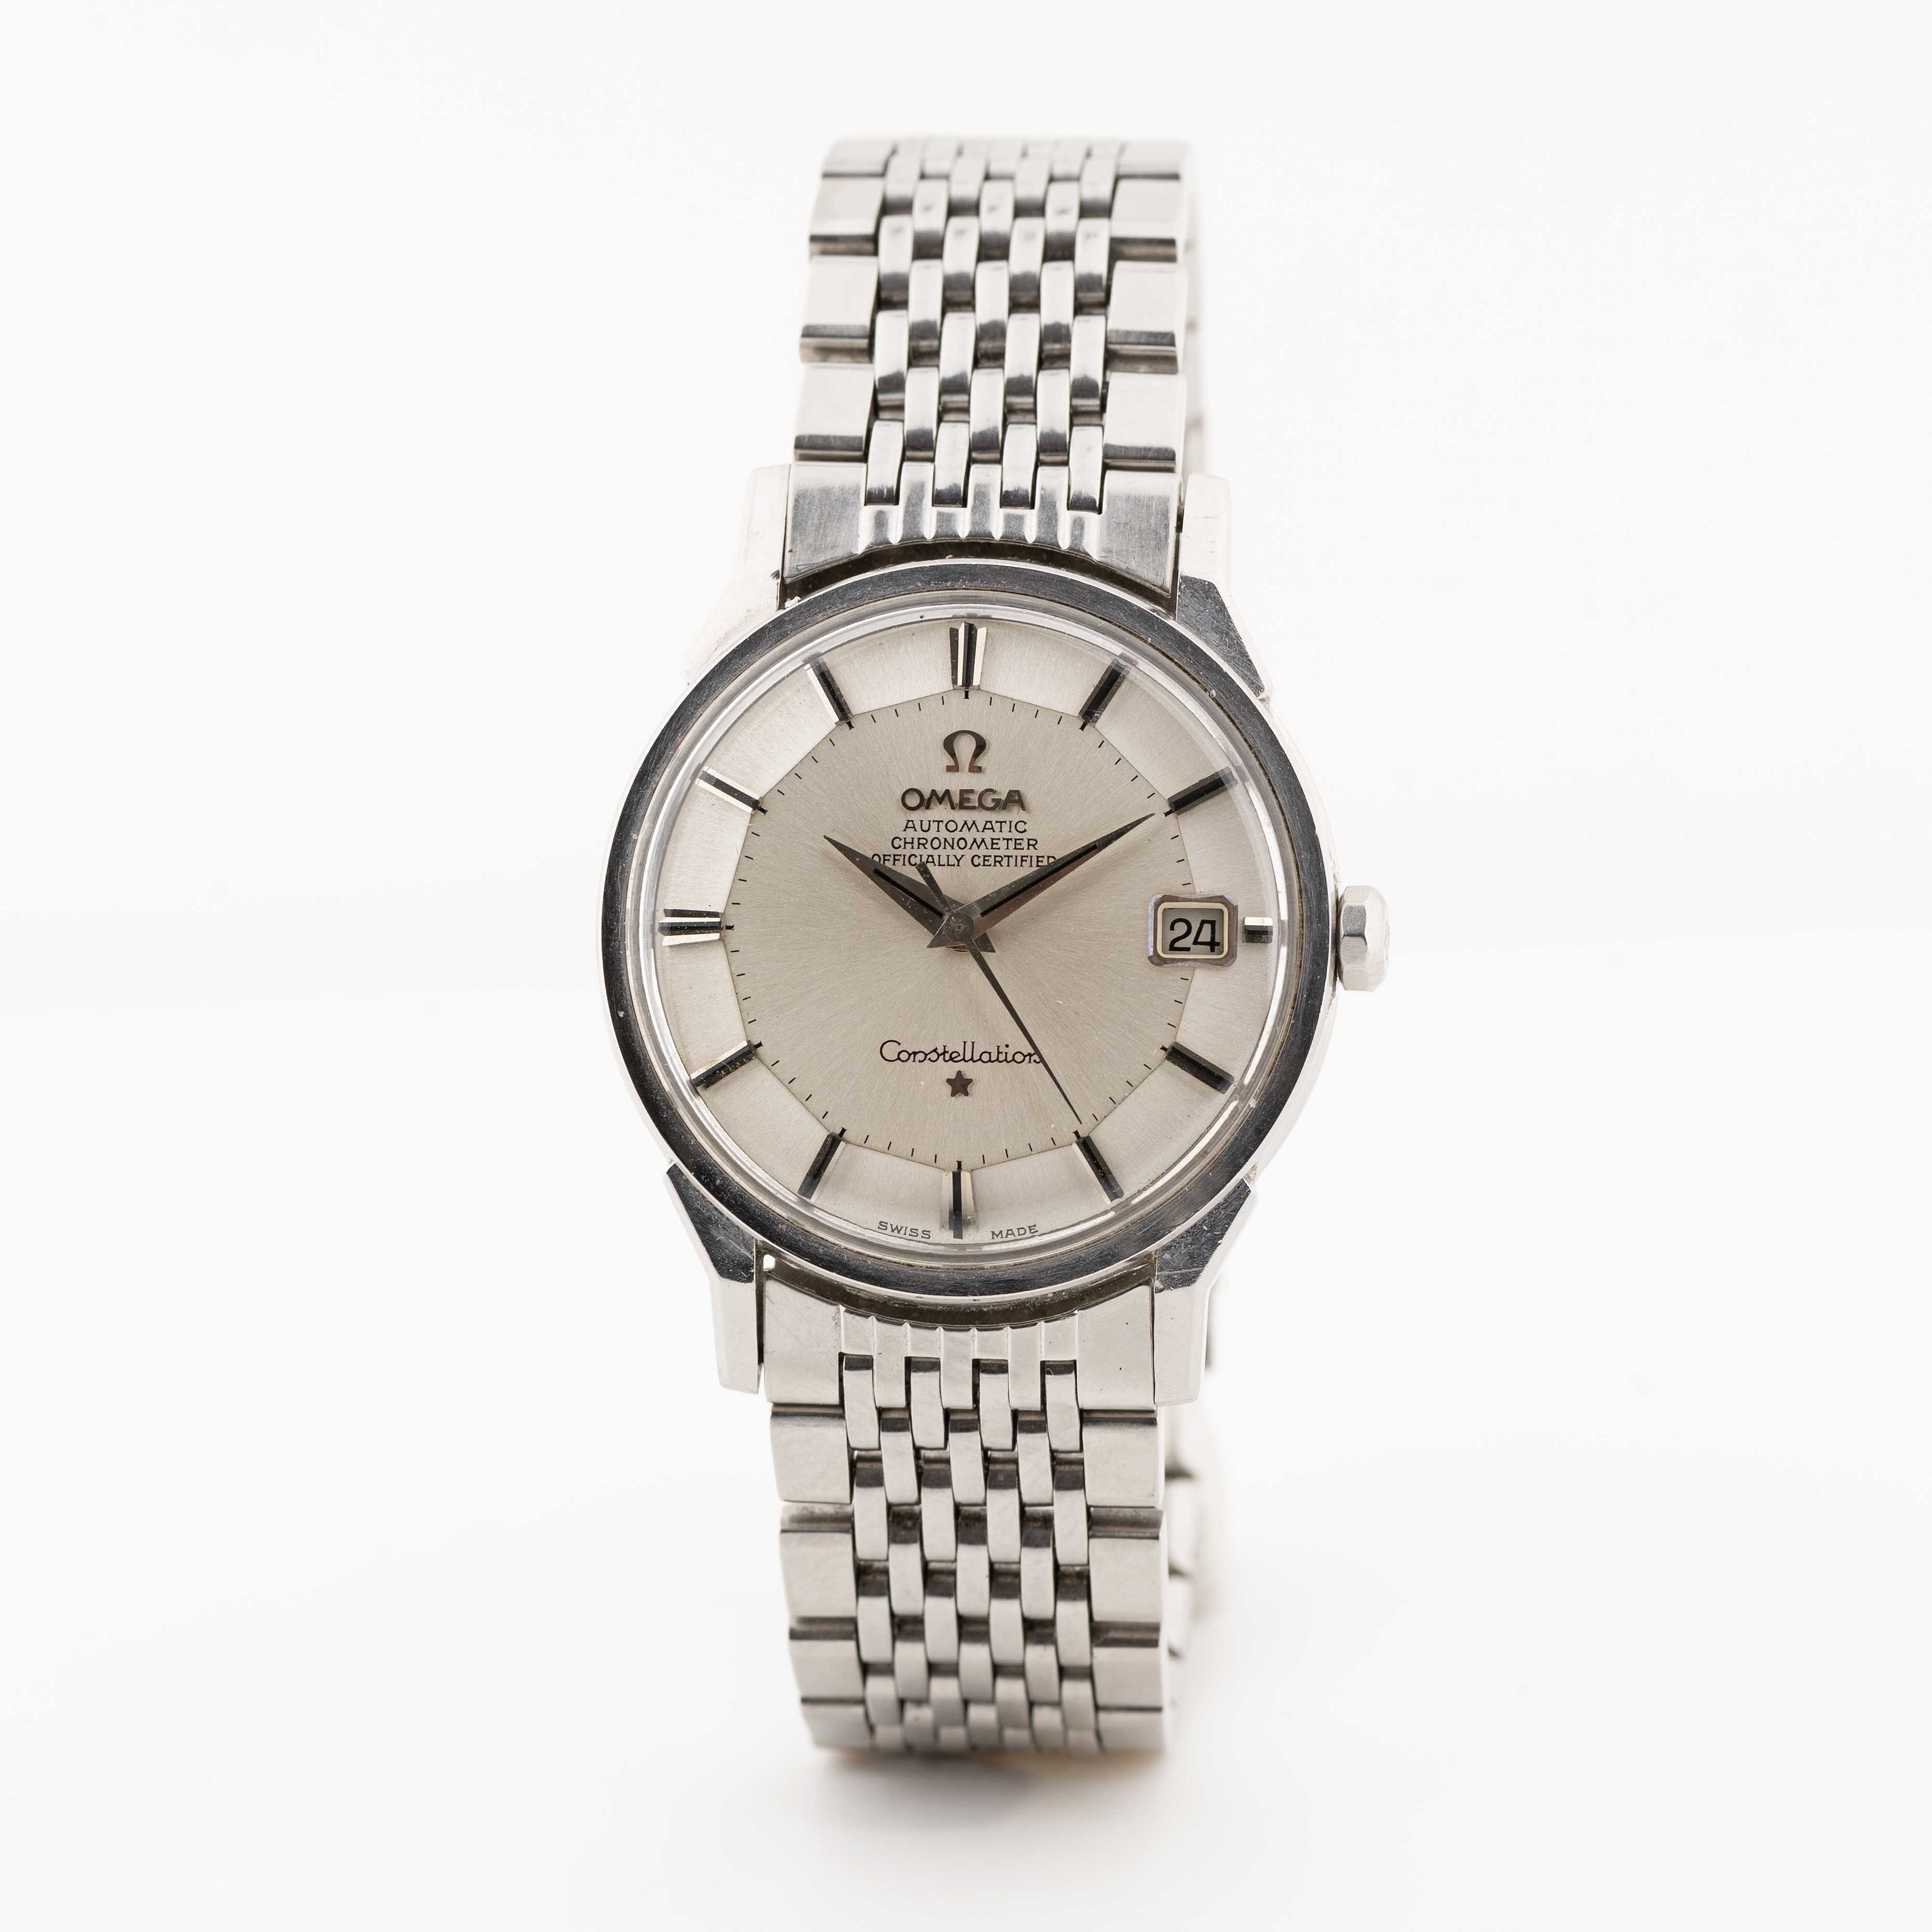 A GENTLEMAN'S STAINLESS STEEL OMEGA CONSTELLATION CHRONOMETER BRACELET WATCH CIRCA 1963, REF. 168. - Image 3 of 11